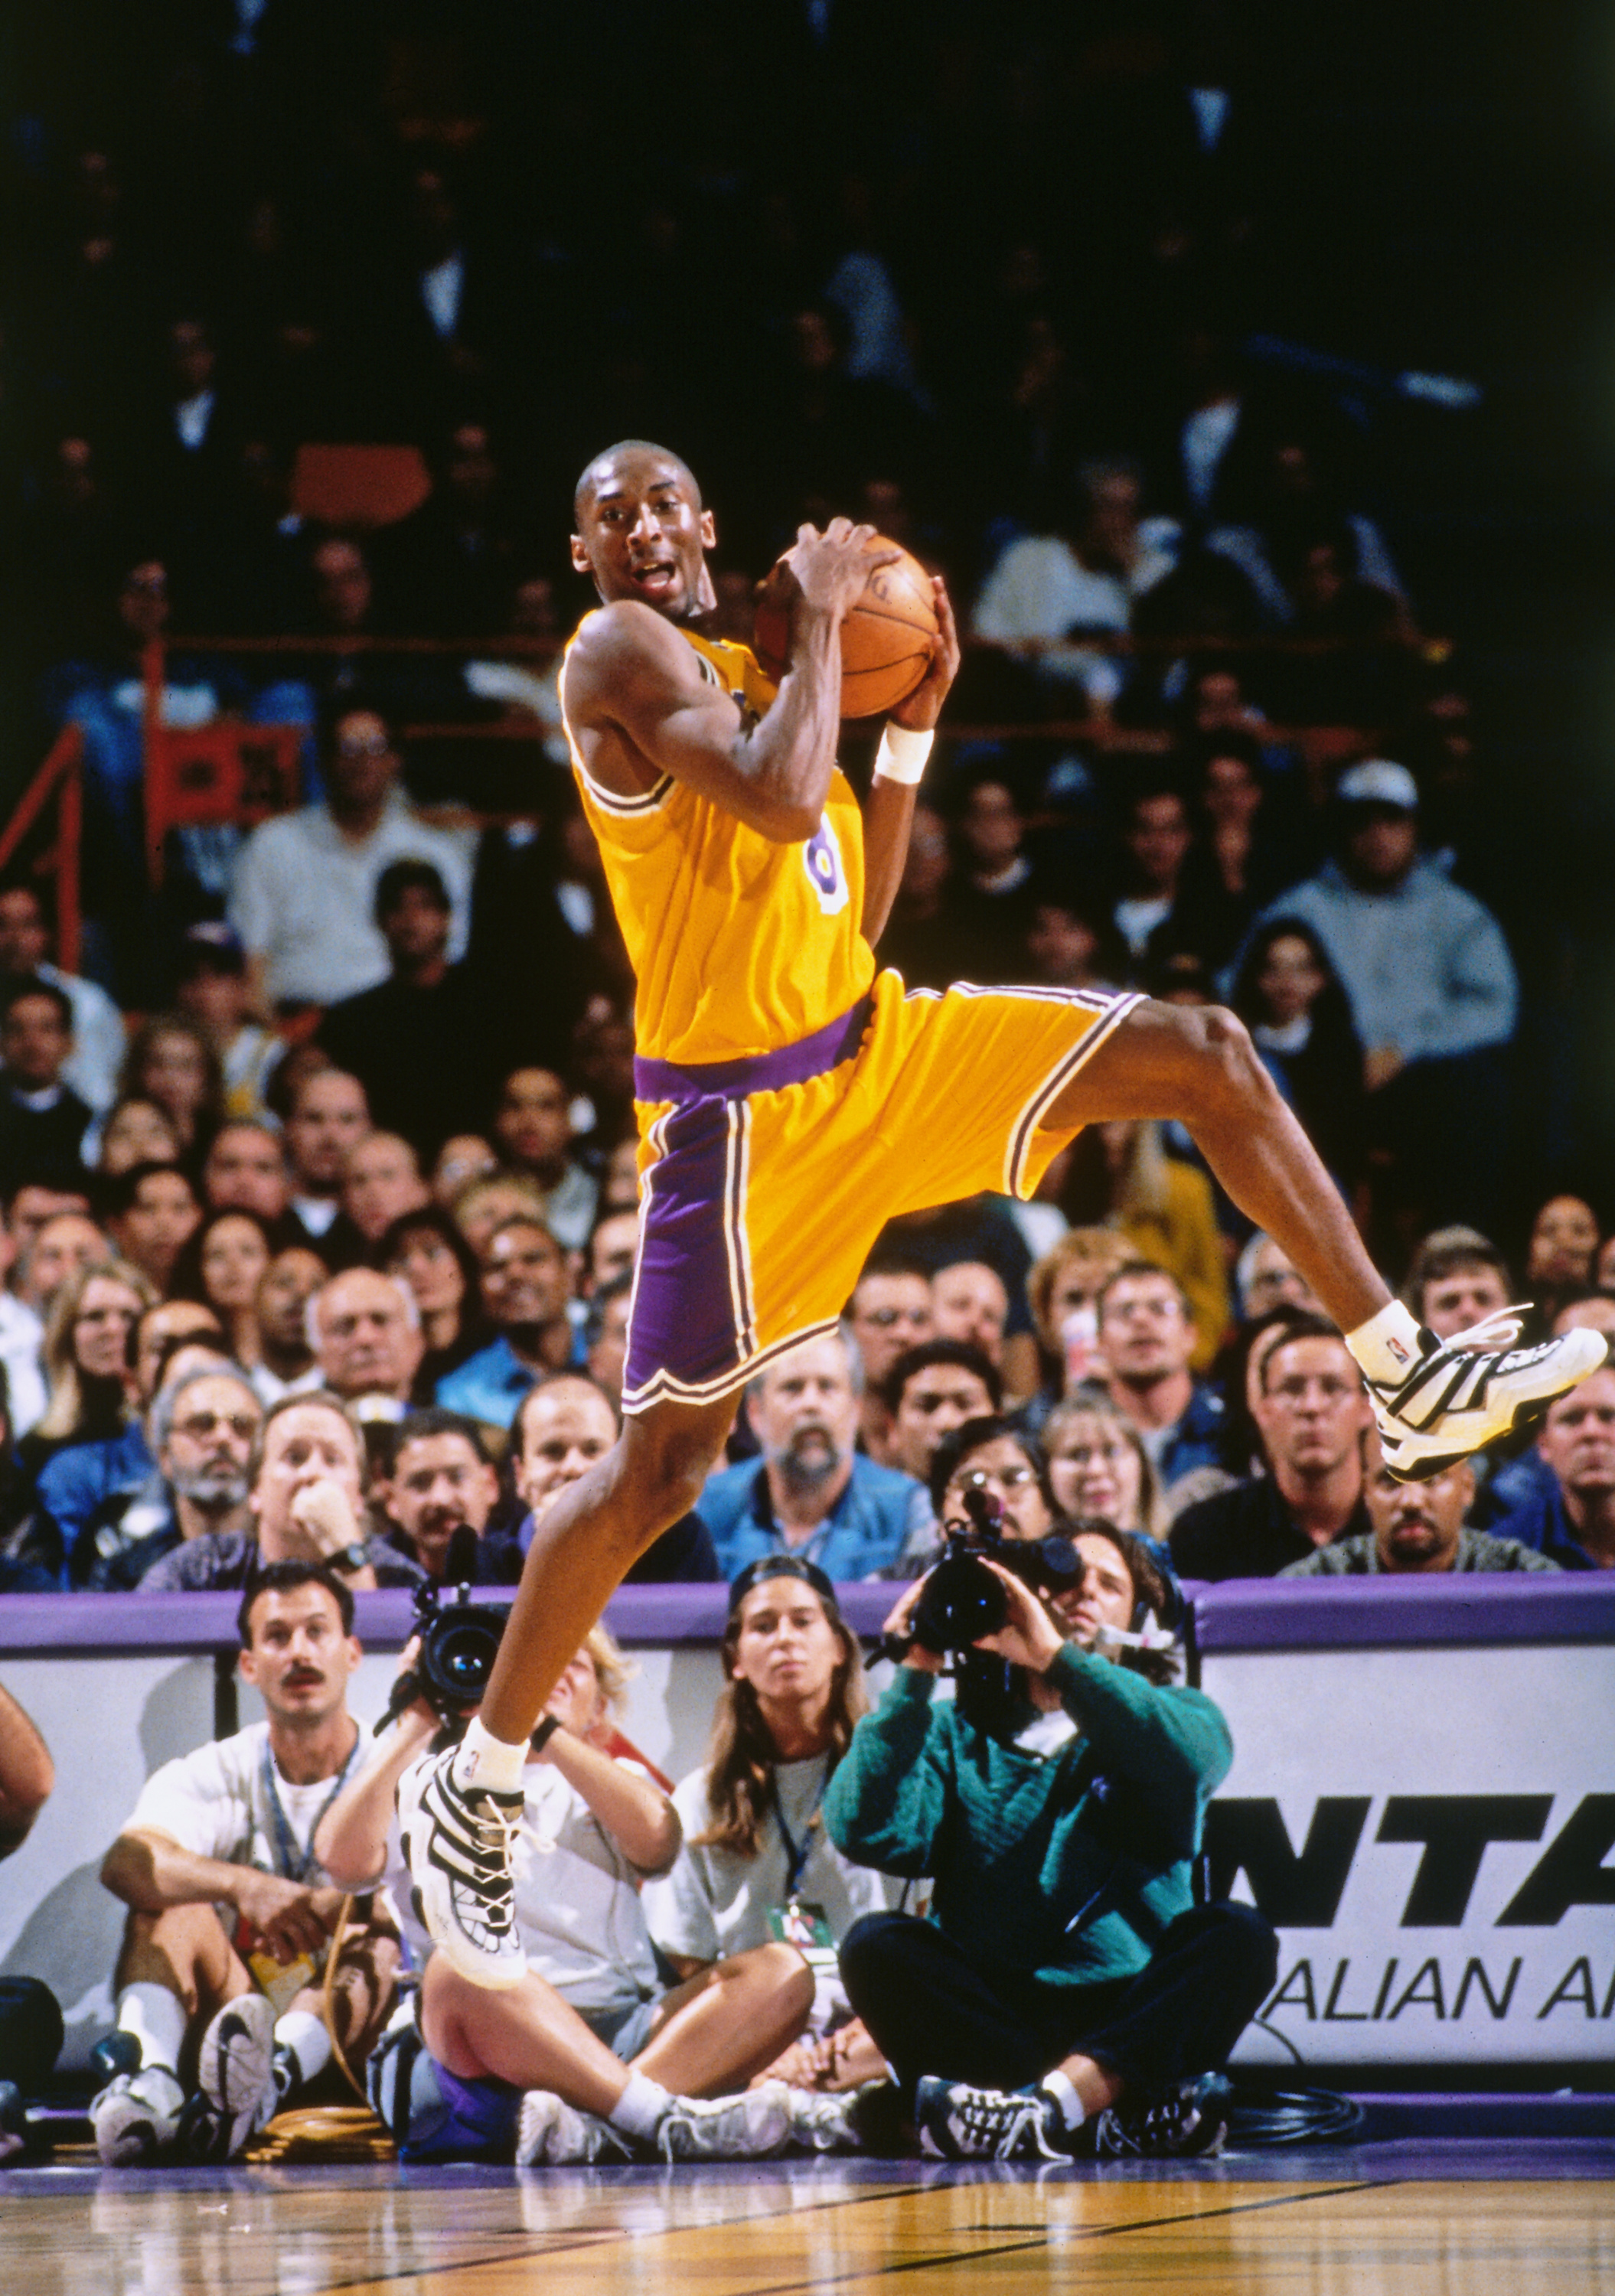 INGLEWOOD, CA - NOVEMBER 3: Kobe Bryant #8 of the Los Angeles Lakers rebounds against the Minnesota Timberwolves in his first regular season game on November 3, 1996 at The Forum in Inglewood, California. NOTE TO USER: User expressly acknowledges and agrees that, by downloading and/or using this Photograph, user is consenting to the terms and conditions of the Getty Images License Agreement. Mandatory Copyright Notice: Copyright 1996 NBAE (Photo by Andrew D. Bernstein/NBAE via Getty Images)